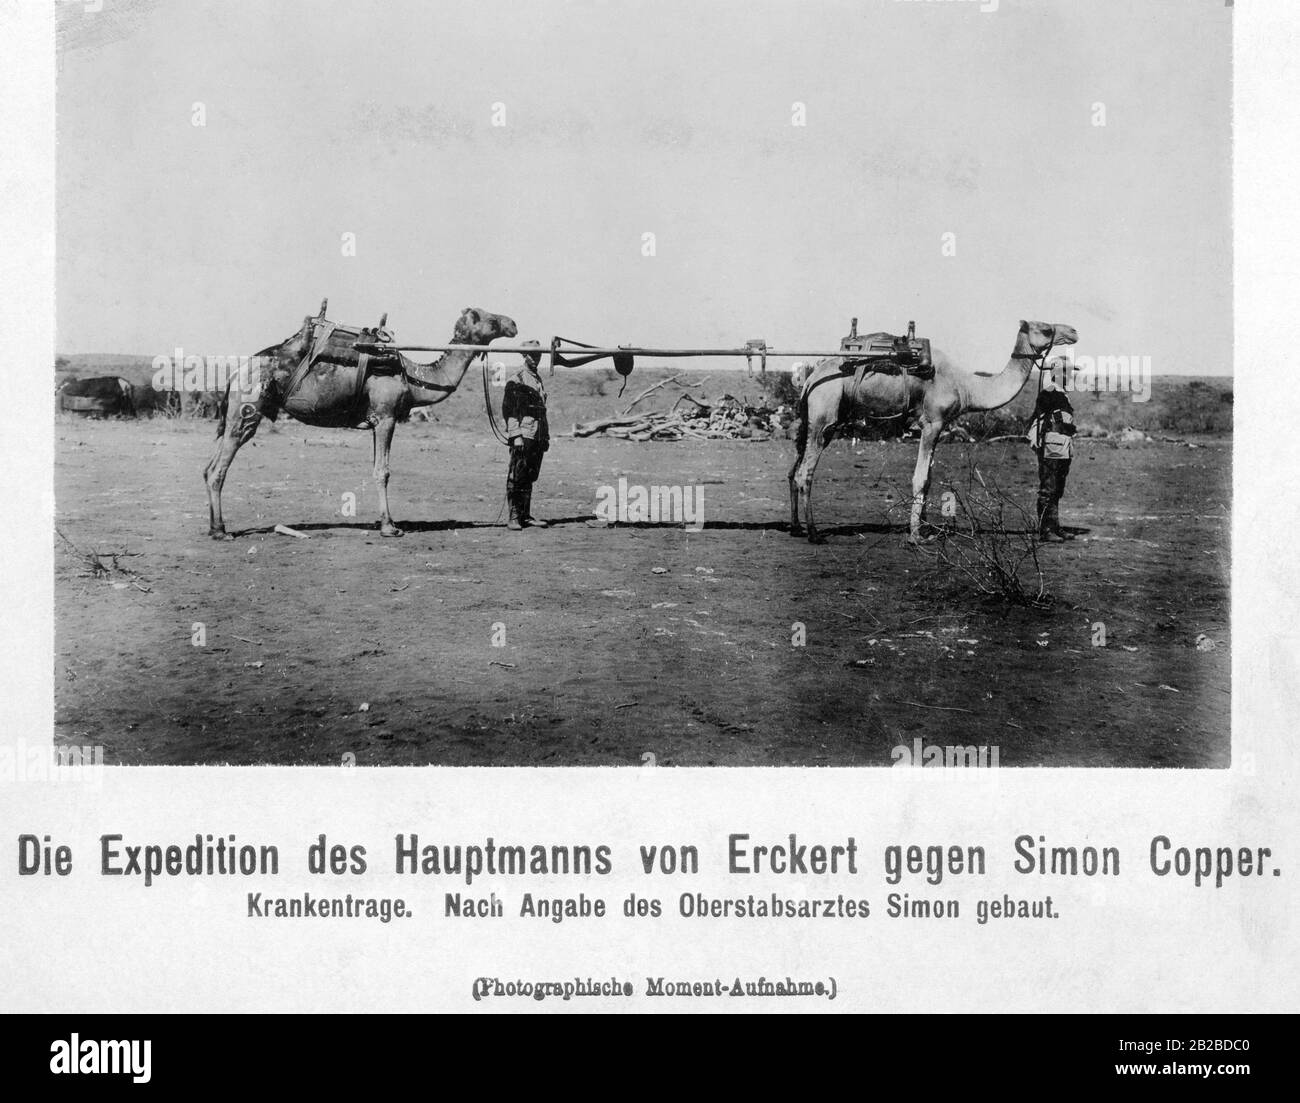 In German South West Africa, the native inhabitants rebelled against German supremacy between 1904 and 1908, first under the leadership of Hendrik Witbooi and after his death in 1905, under Simon Copper.  The German campaign under Captain Friedrich von Erckert was directed against them. In the picture, a stretcher for the wounded German soldiers. Stock Photo